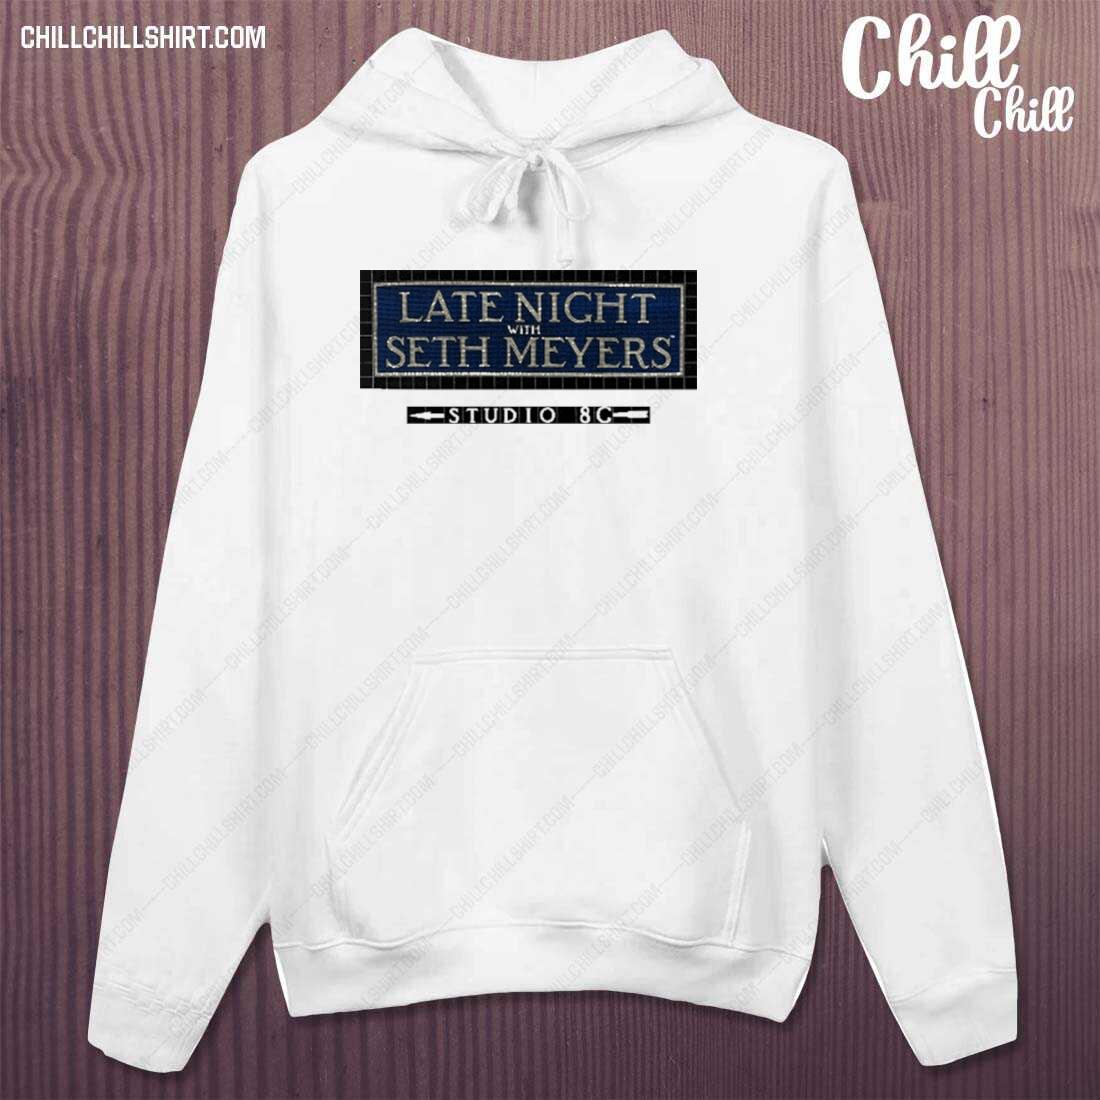 Official late Night With Seth Meyers Studio 8g Tee T-s hoodie